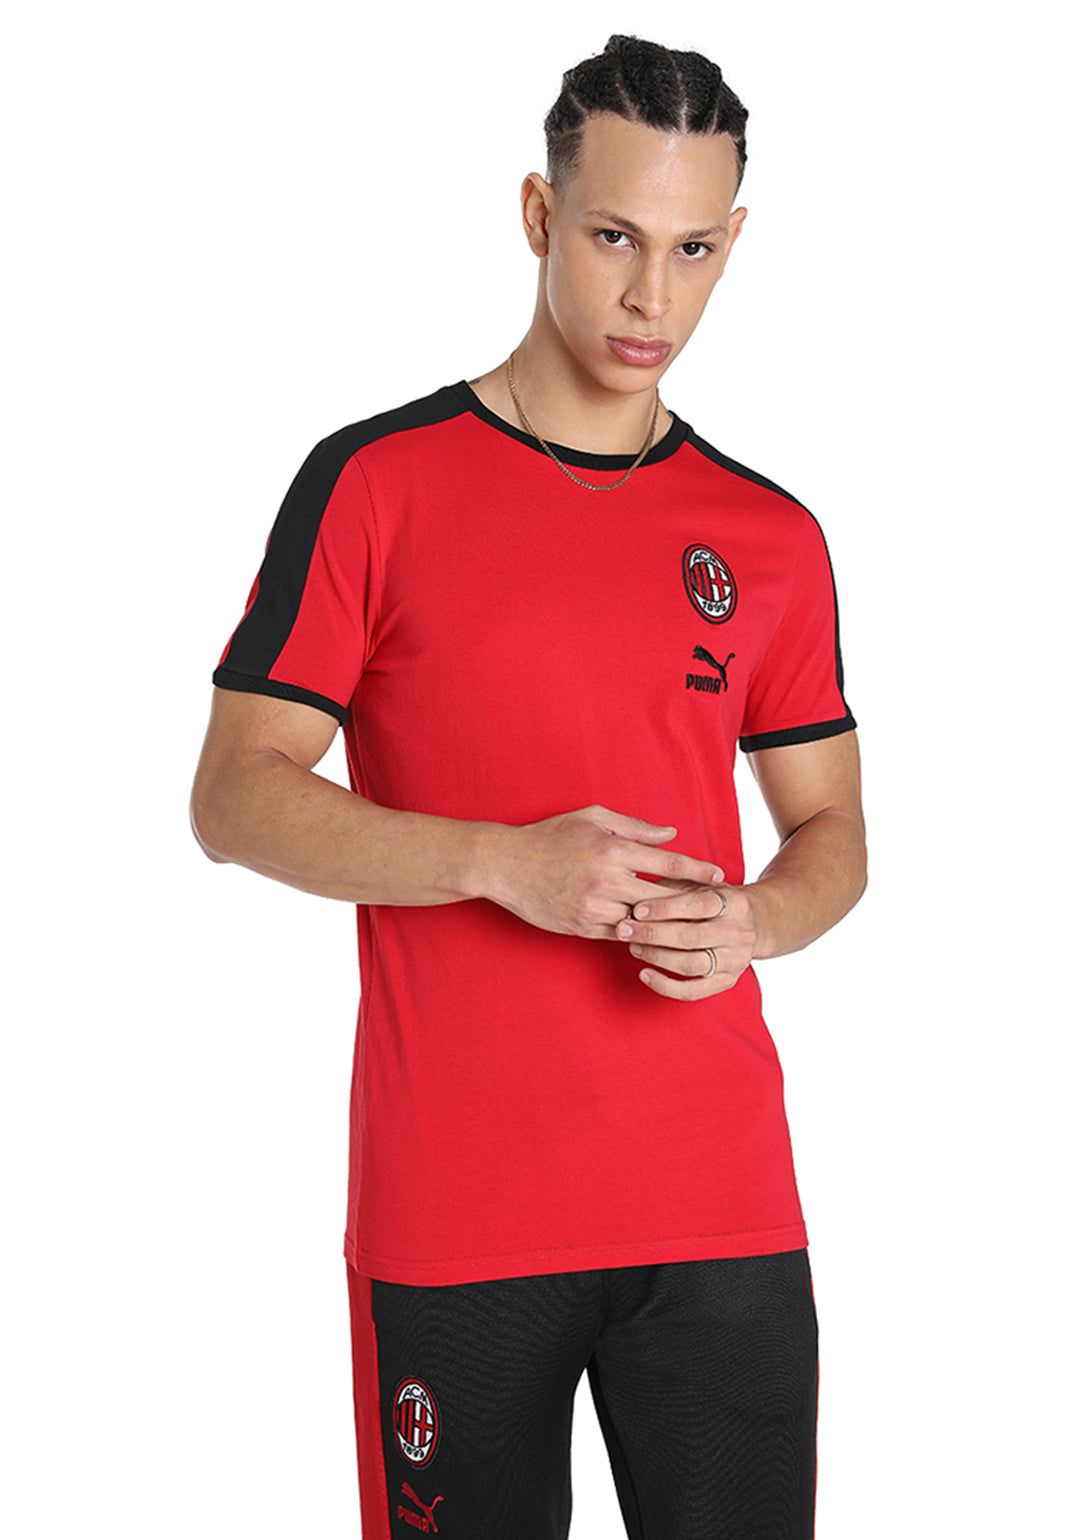 Buy Men Red and Black T-Shirt FtblHeritage Fancode From ACM T7